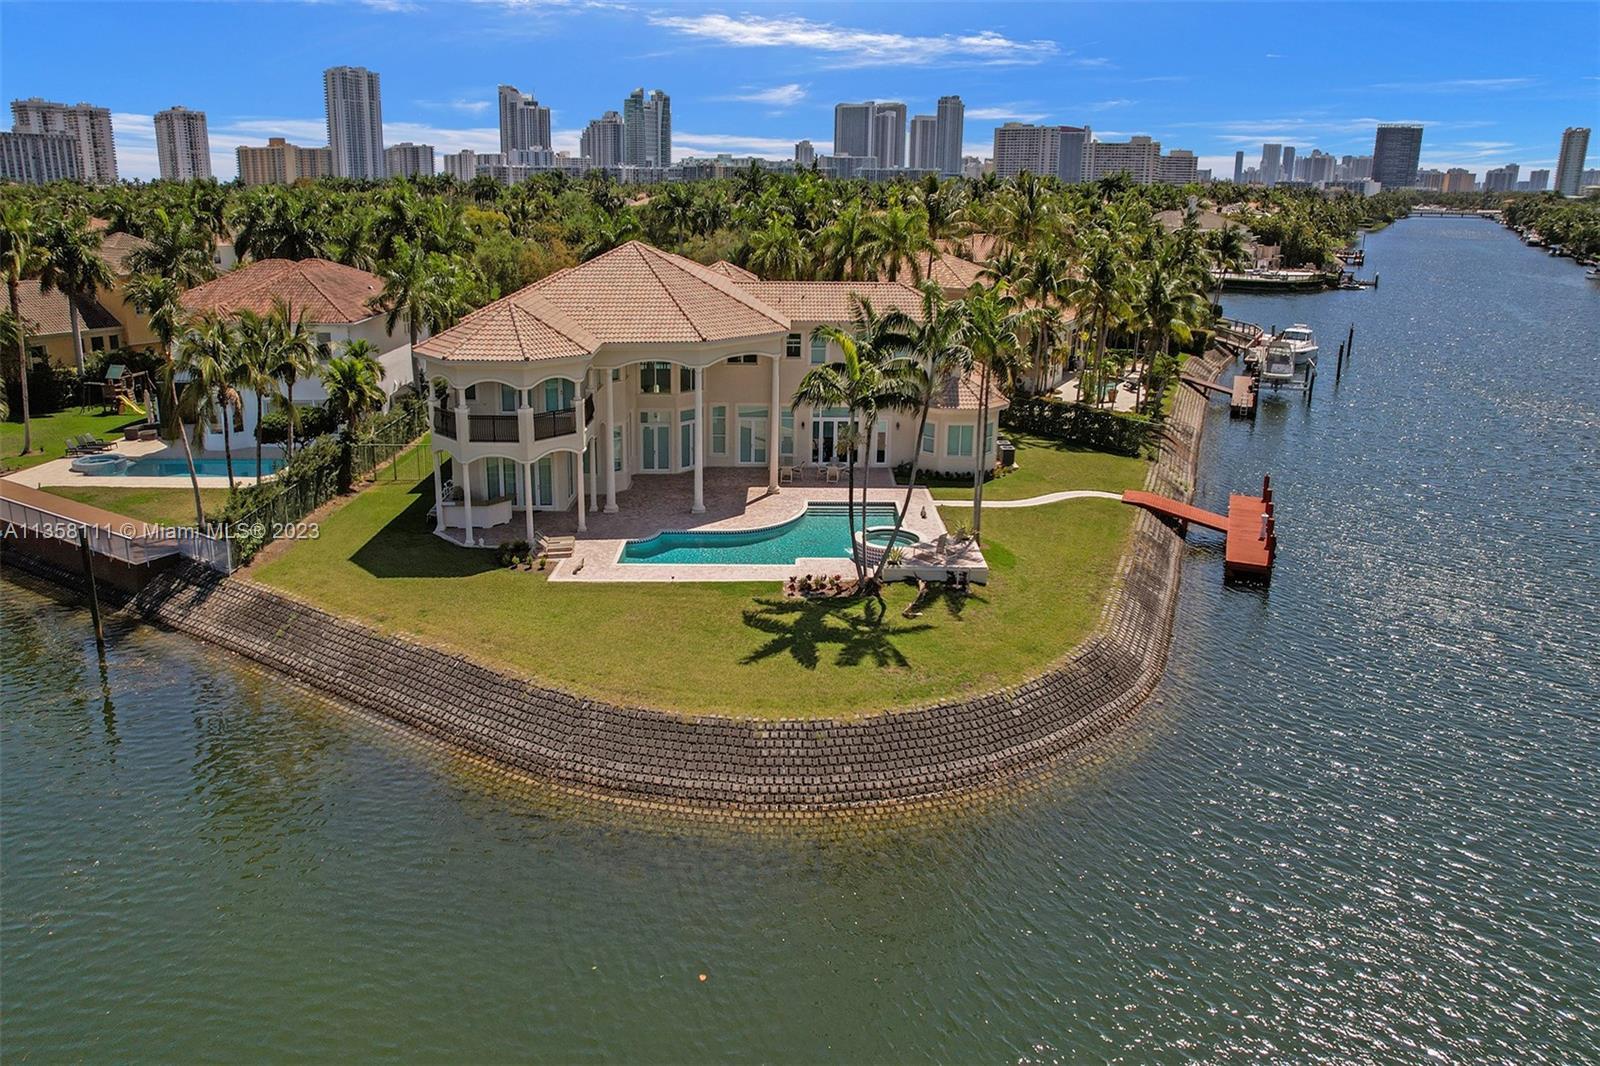 Photo of 1130 Harbor Ct in Hollywood, FL